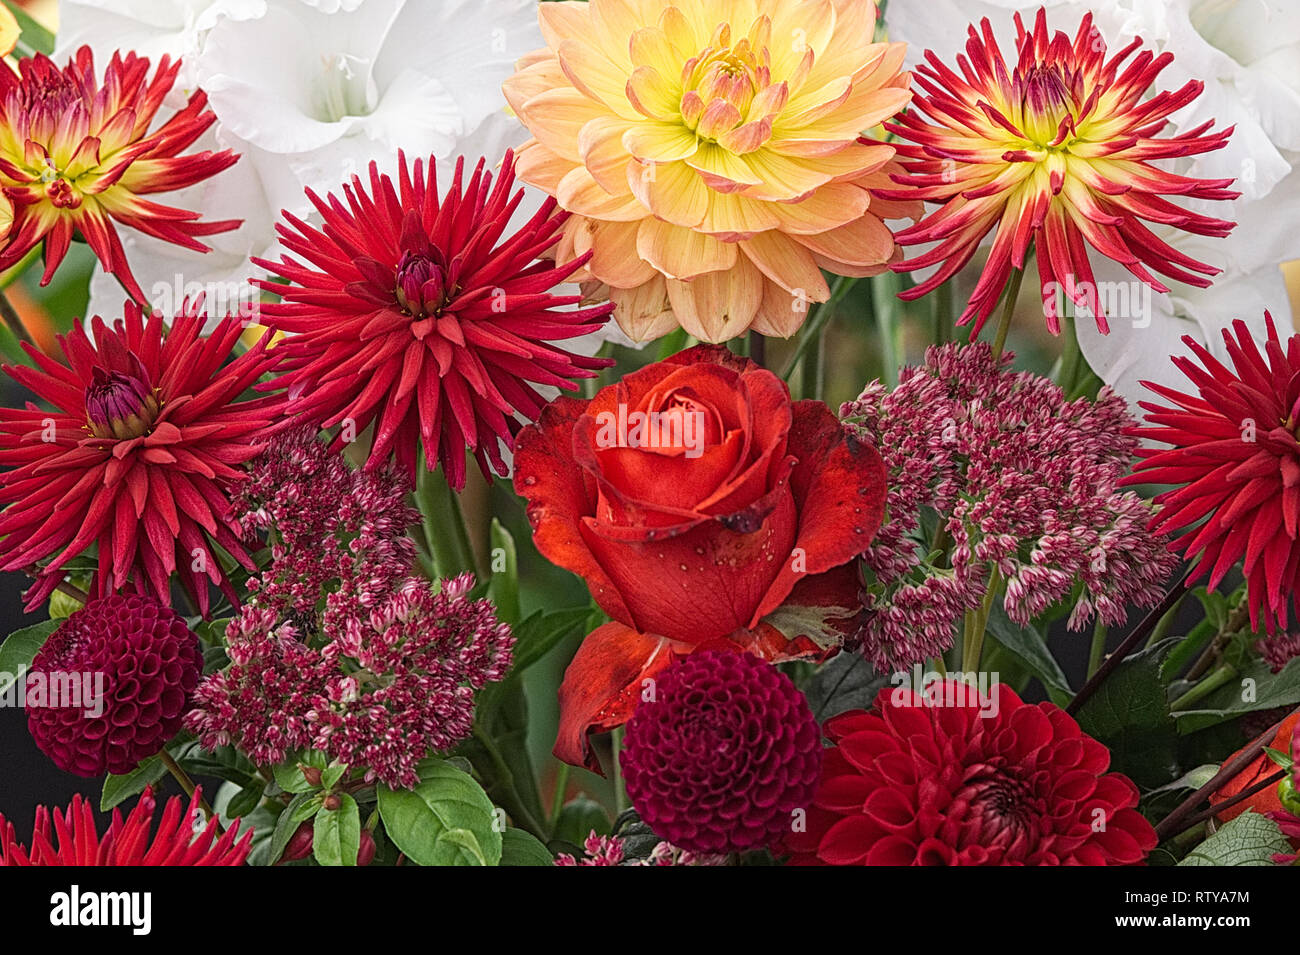 red and yellow floral display Stock Photo